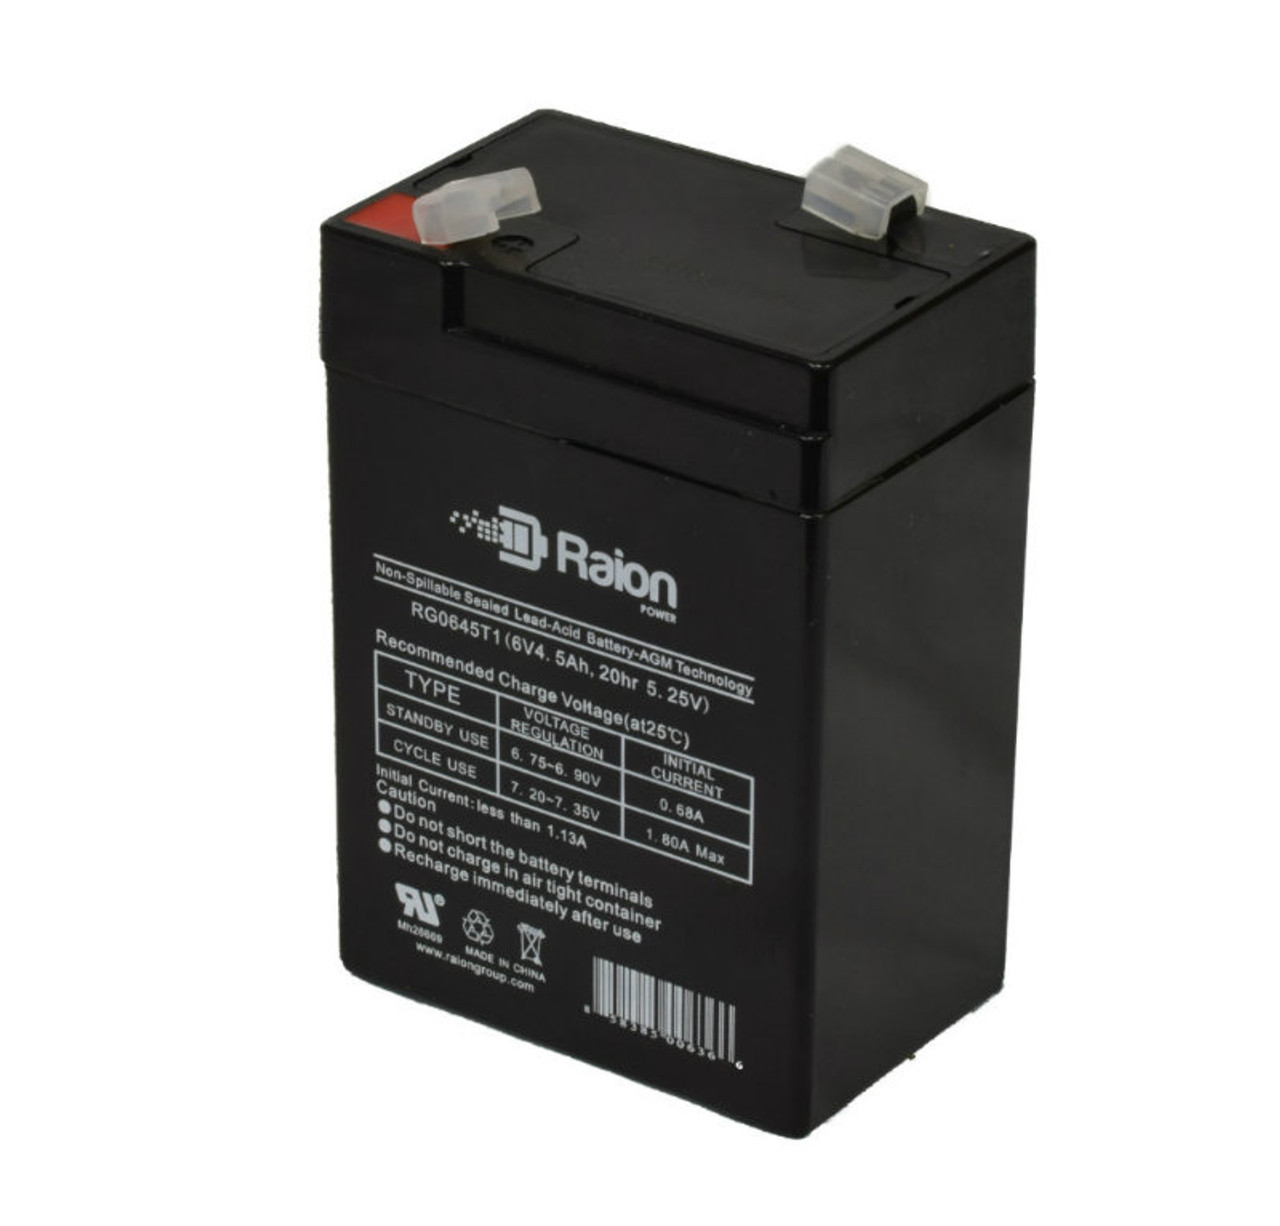 Raion Power RG0645T1 6V 4.5Ah Replacement Battery Cartridge for Light Alarms 2DS3